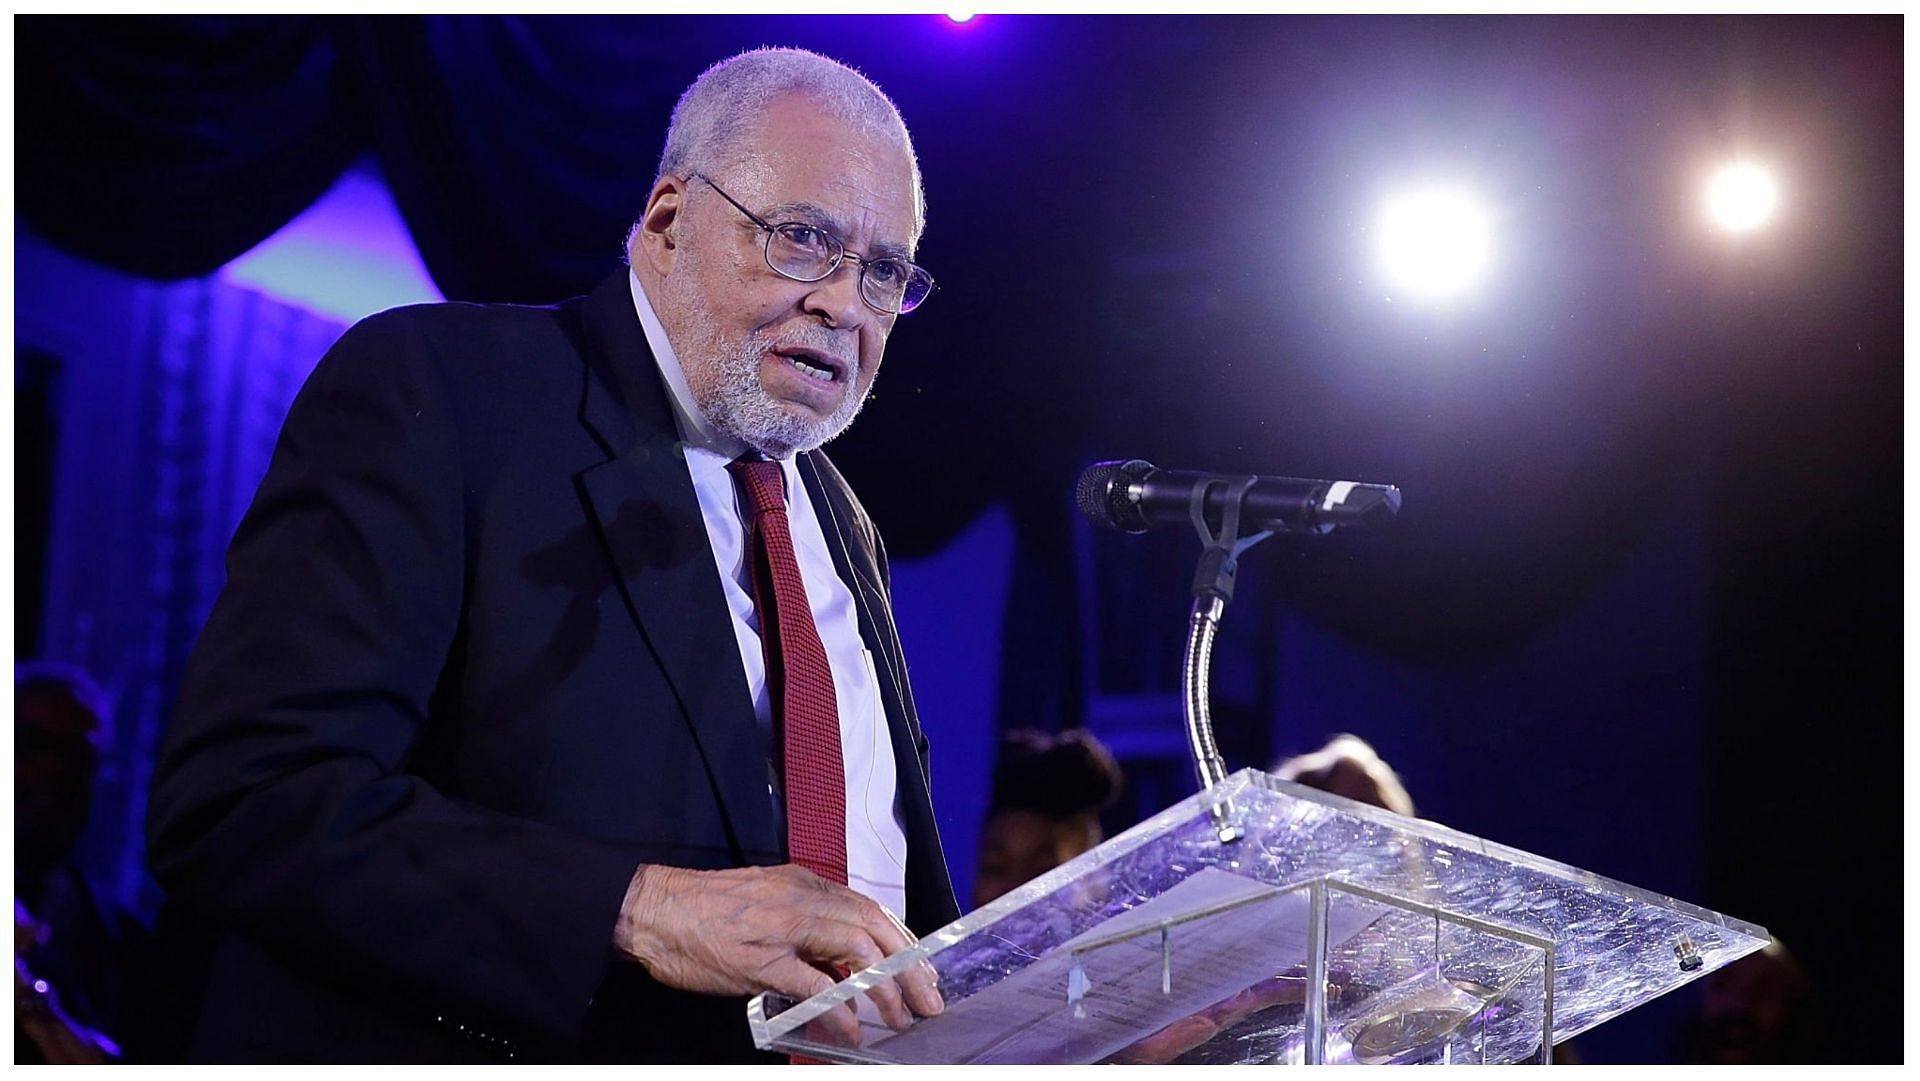 James Earl Jones has earned a lot from his film career and the Star Wars franchise (Image via John Lamparski/Getty Images)